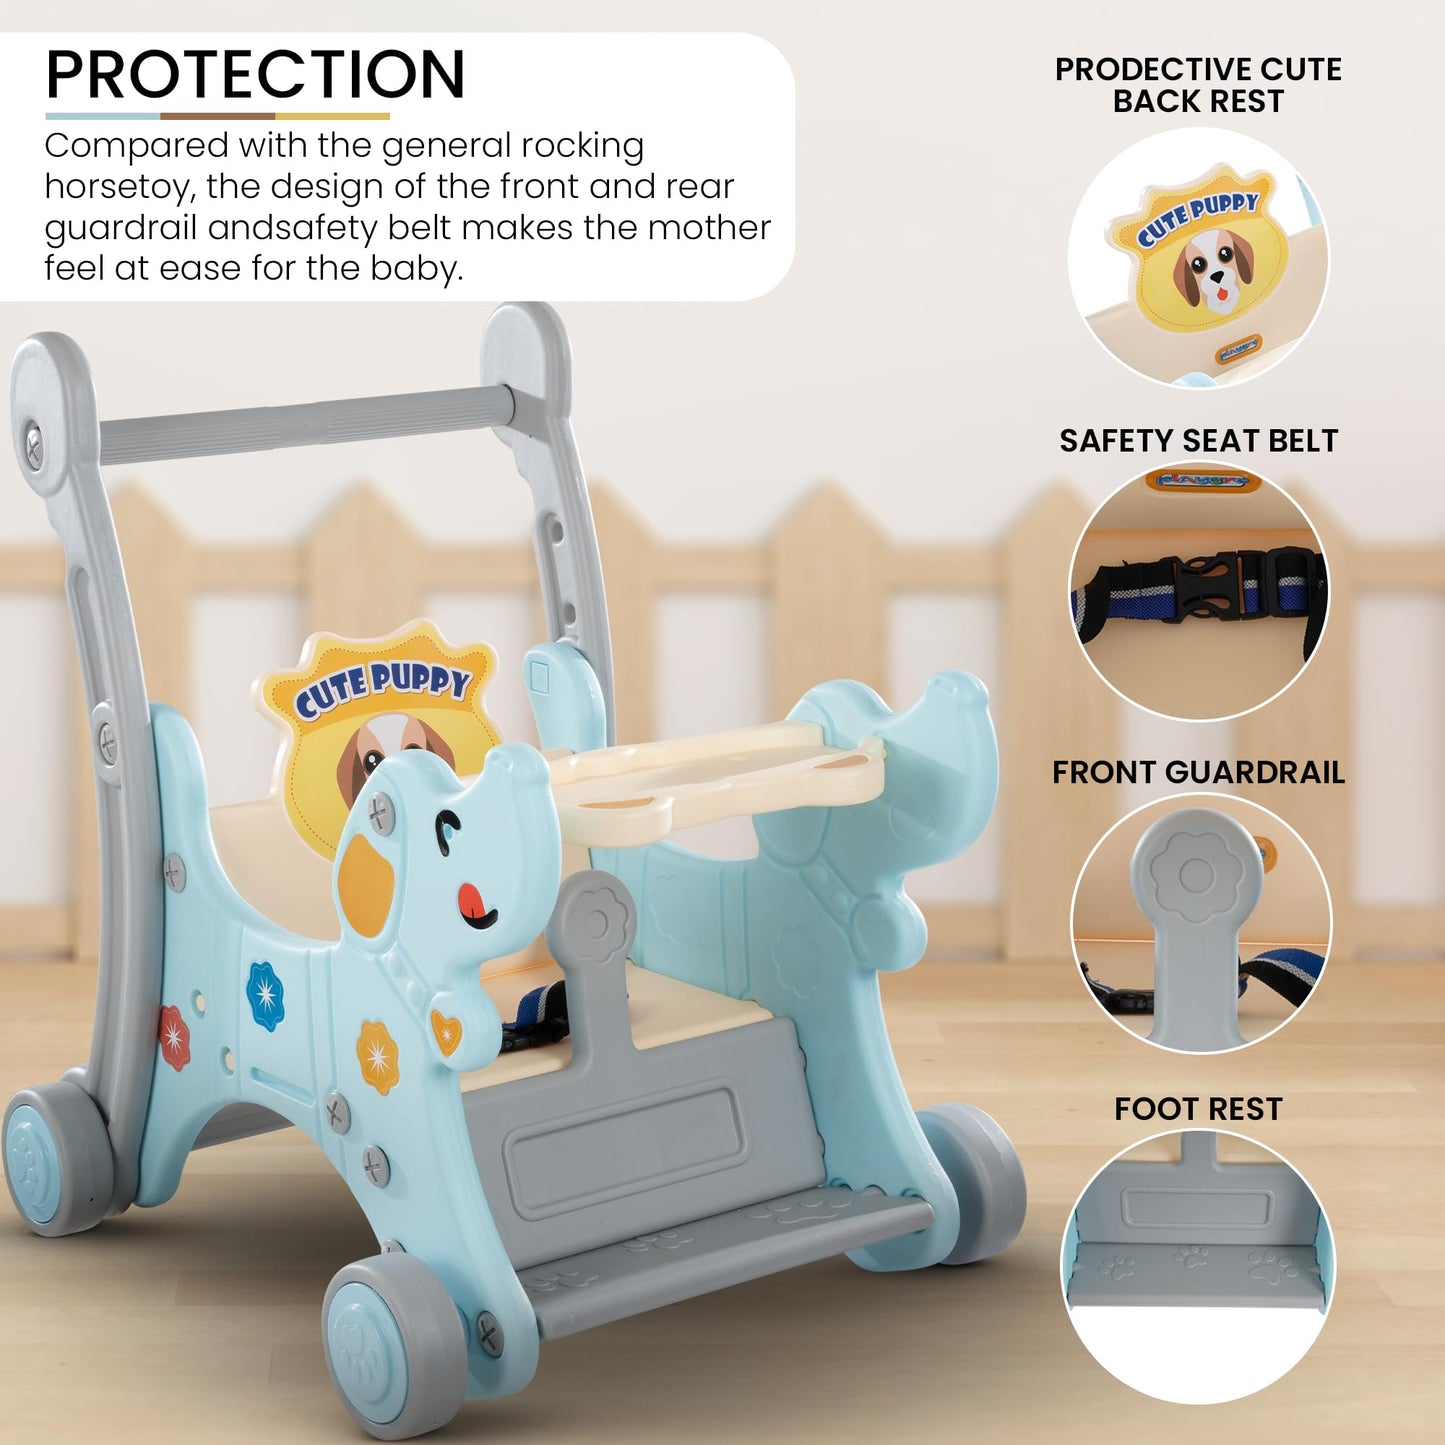 Baybee 3 in 1 Puppy Baby Rocking Chair for Kids | Baby Rocker Rider Toy for Kids with Food Tray, Seat Belt & Backrest